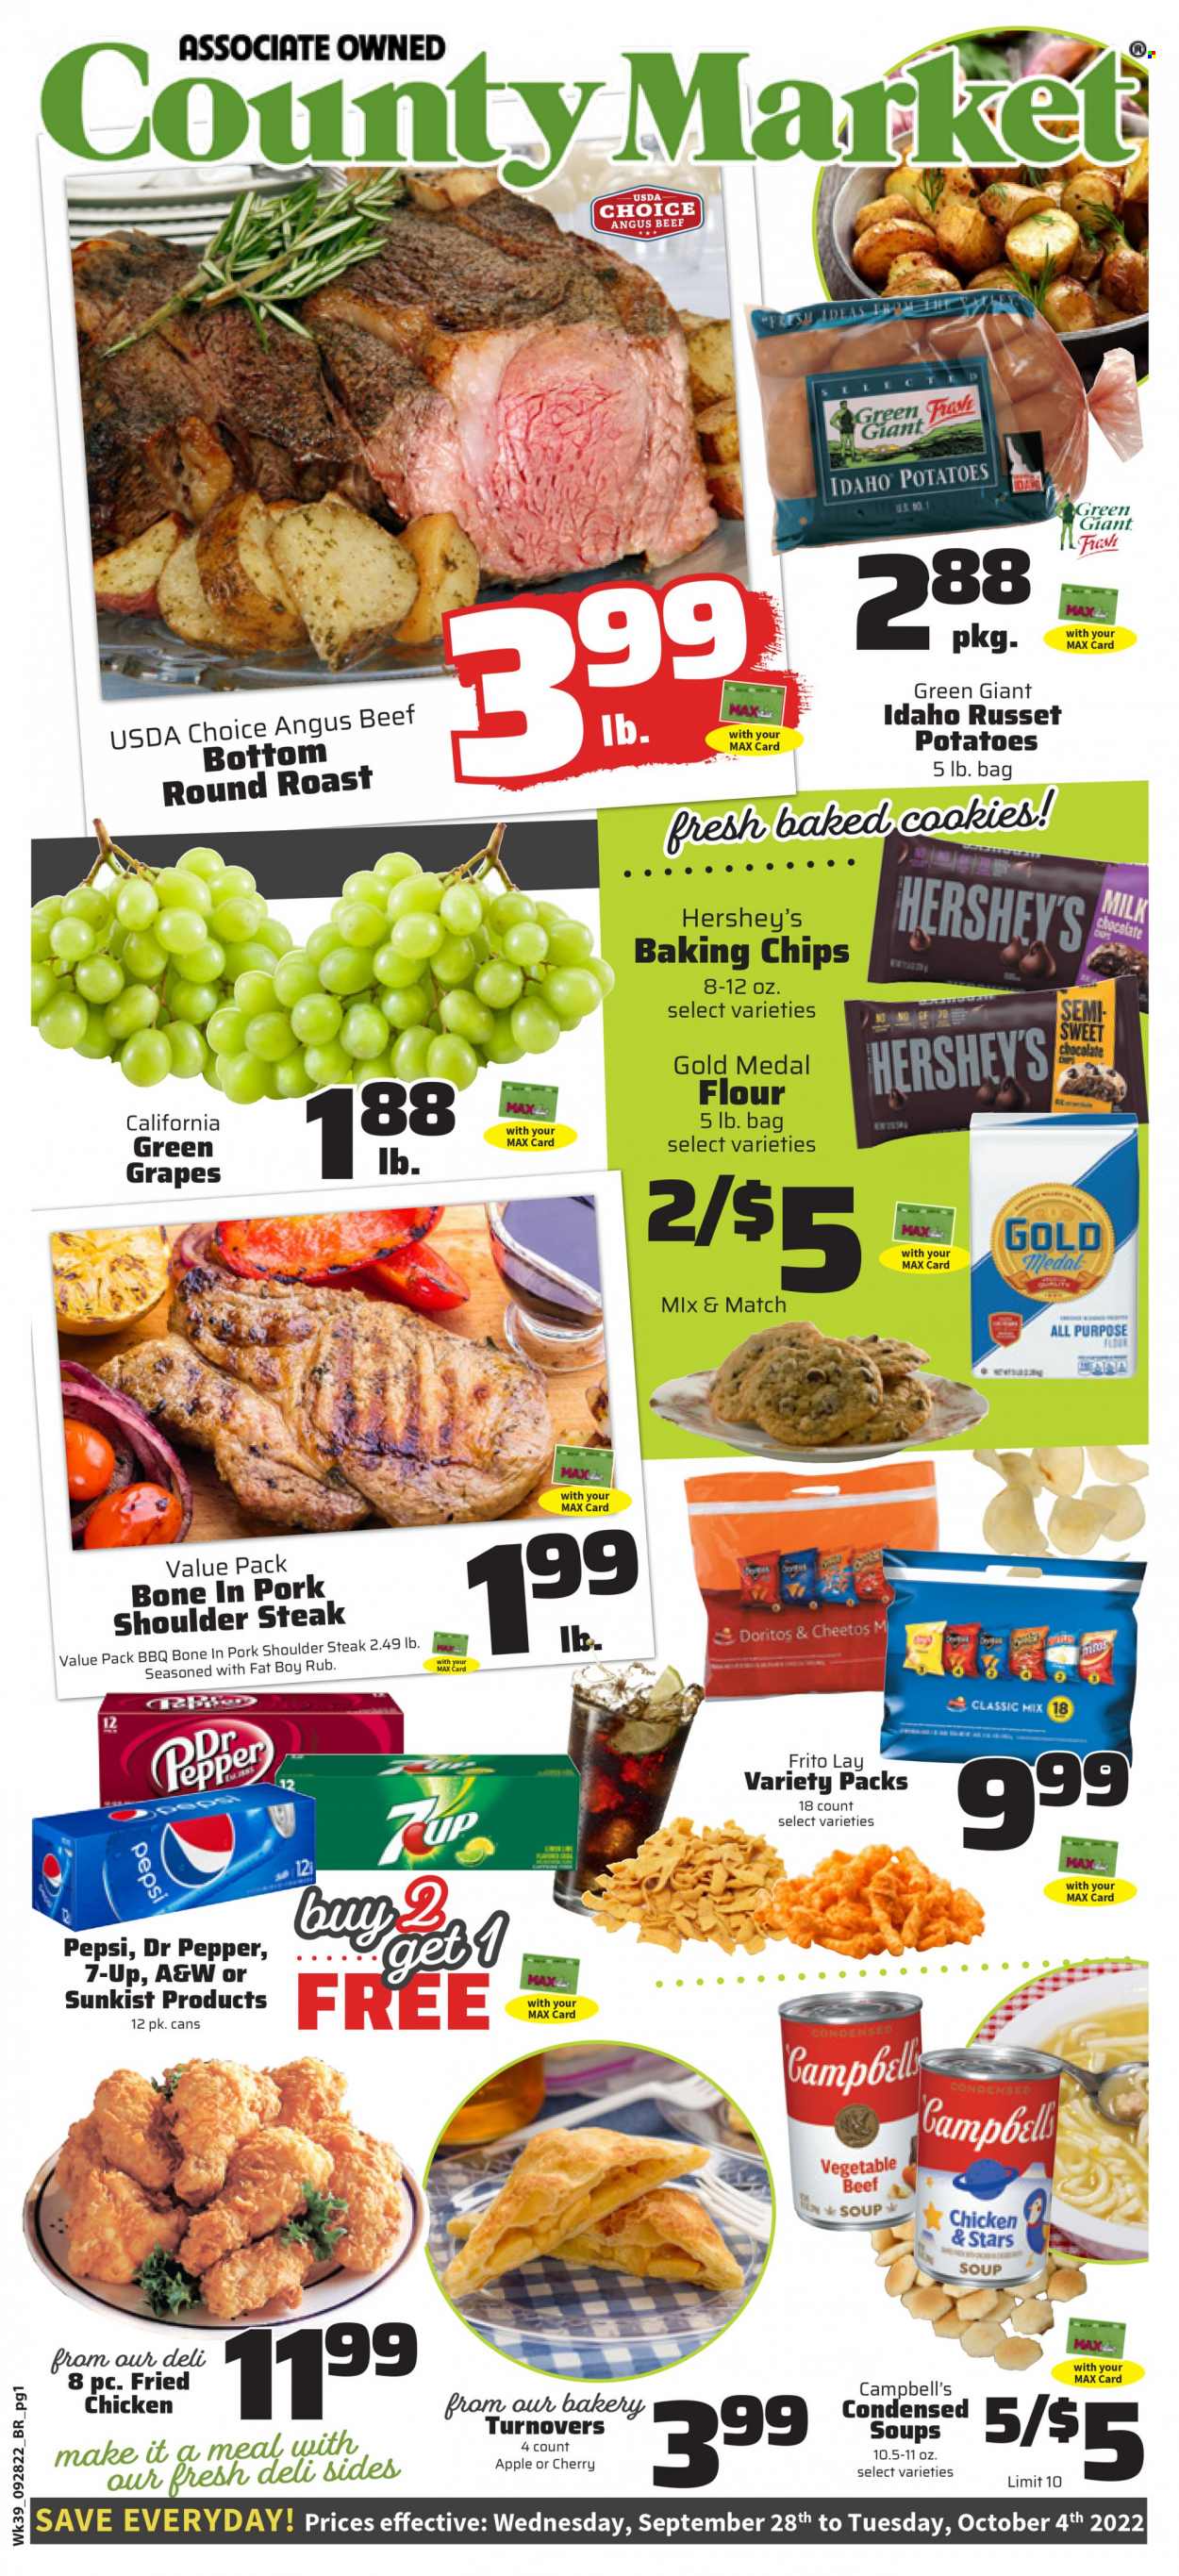 thumbnail - County Market Flyer - 09/28/2022 - 10/04/2022 - Sales products - turnovers, russet potatoes, potatoes, grapes, Campbell's, soup, fried chicken, Hershey's, cookies, milk chocolate, chocolate, Doritos, Cheetos, flour, baking chips, Pepsi, Dr. Pepper, 7UP, A&W, beef meat, steak, round roast, pork meat, pork shoulder. Page 1.